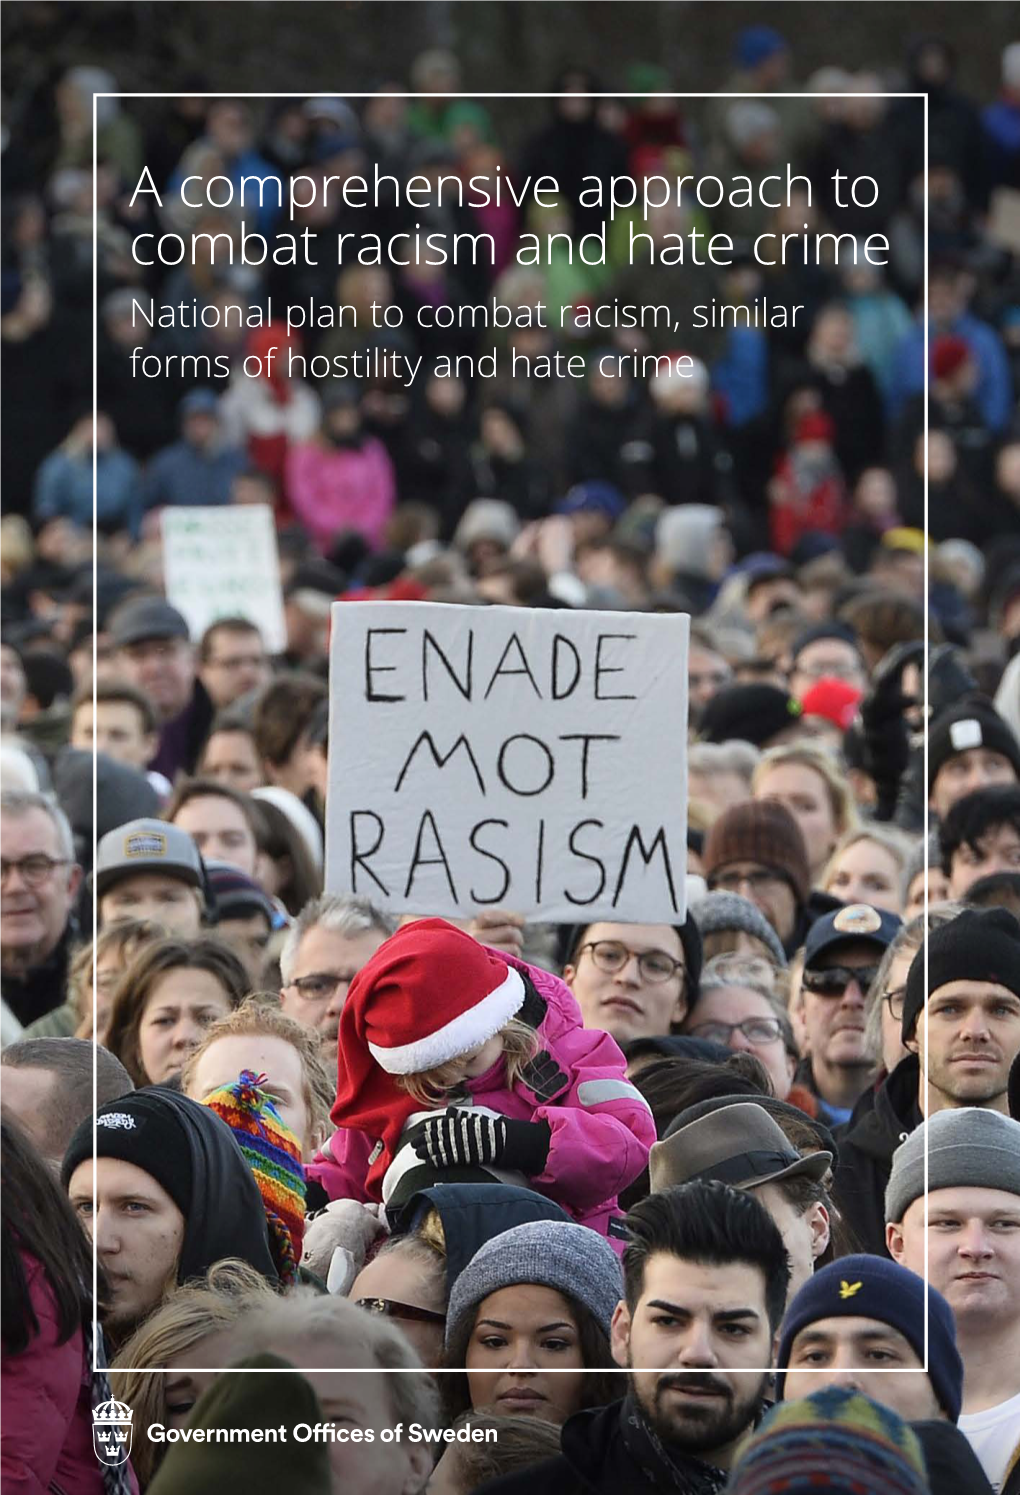 A Comprehensive Approach to Combat Racism and Hate Crime